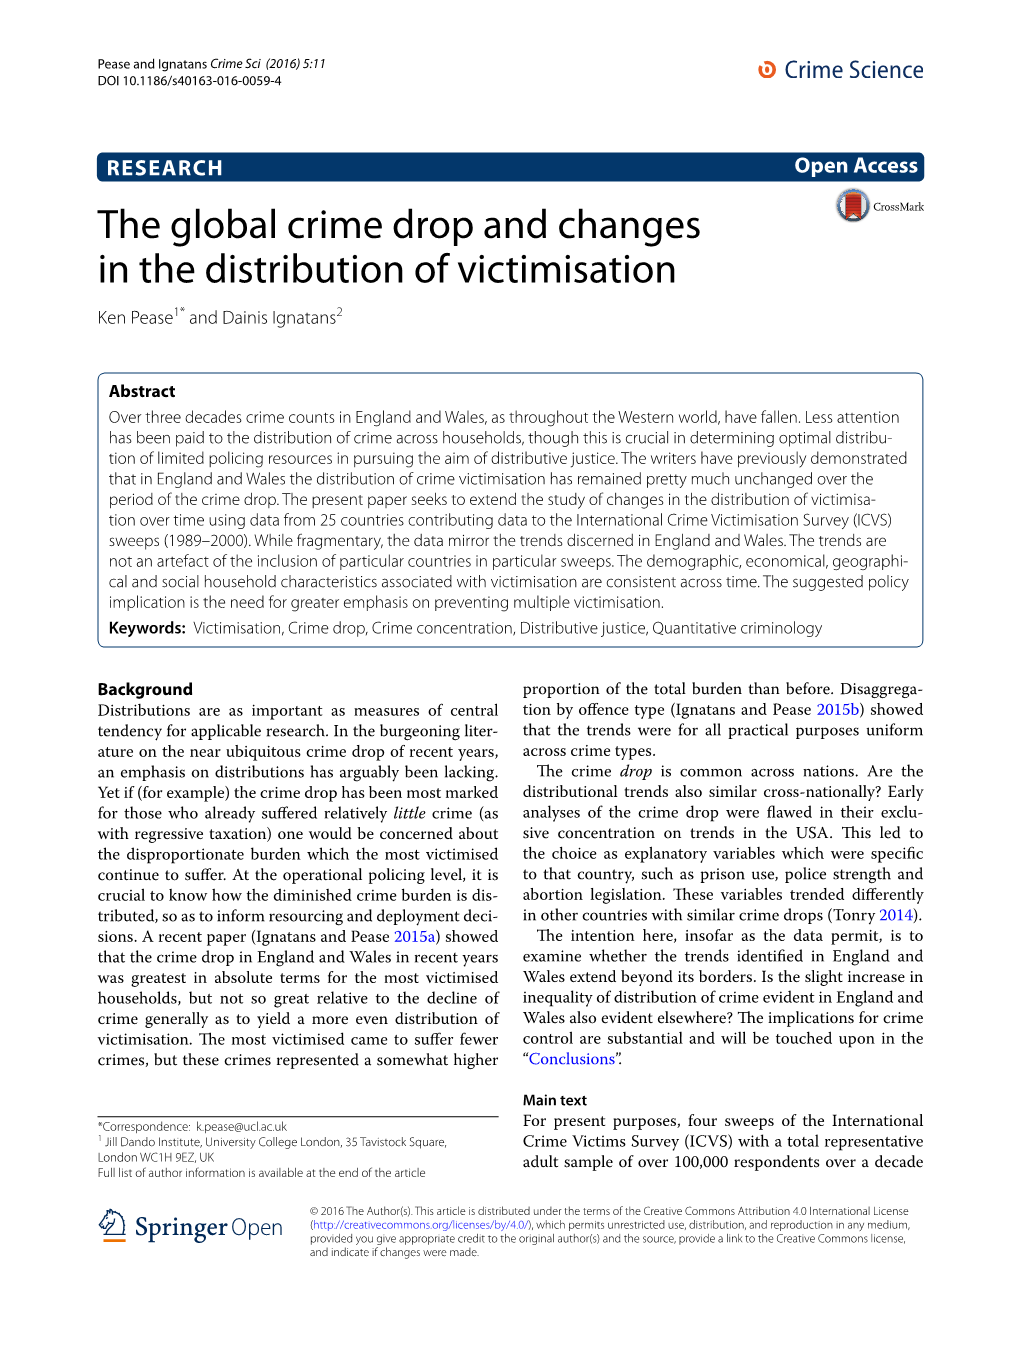 The Global Crime Drop and Changes in the Distribution of Victimisation Ken Pease1* and Dainis Ignatans2